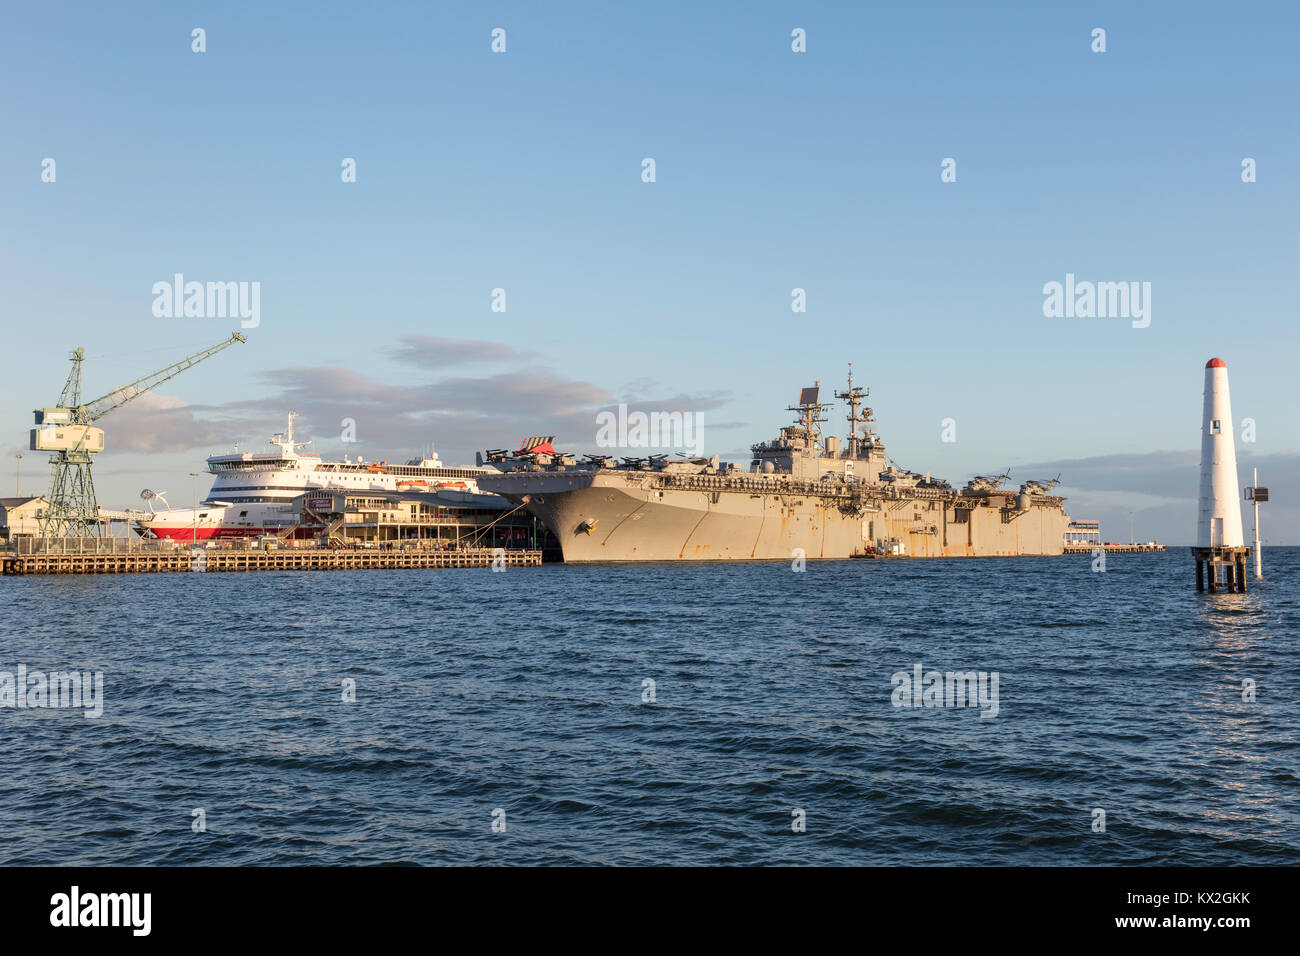 USS Bonhomme Richard (LHD-6) Wasp-class amphibious assault ship of the United States Navy docked at Station Pi Stock Photo